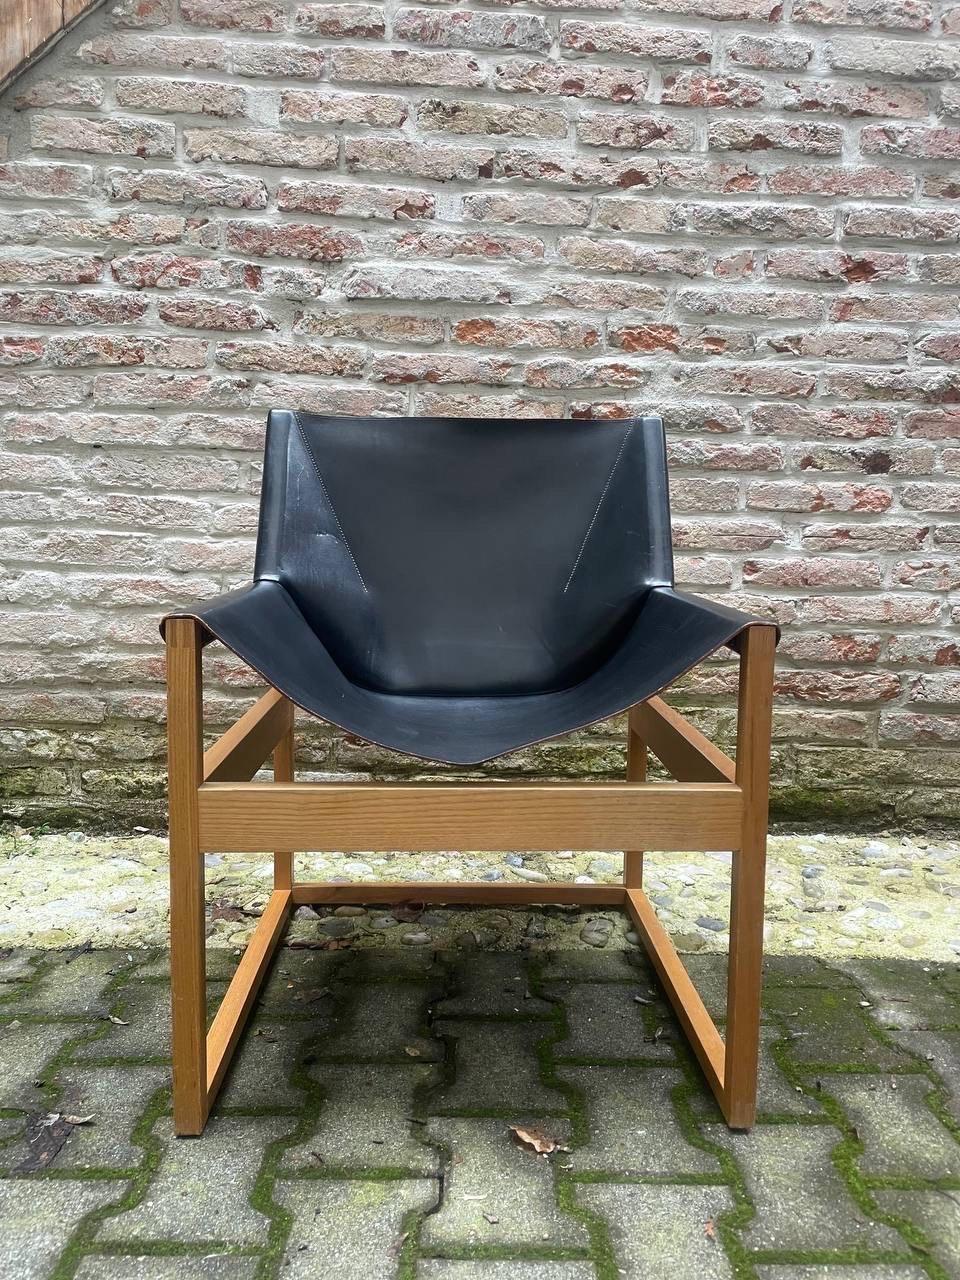 Rare chair with massive beech wood base and thick leather seat. Designed by Rainer Schell in the 1970s. Made in Germany by Schlapp Möbel. 